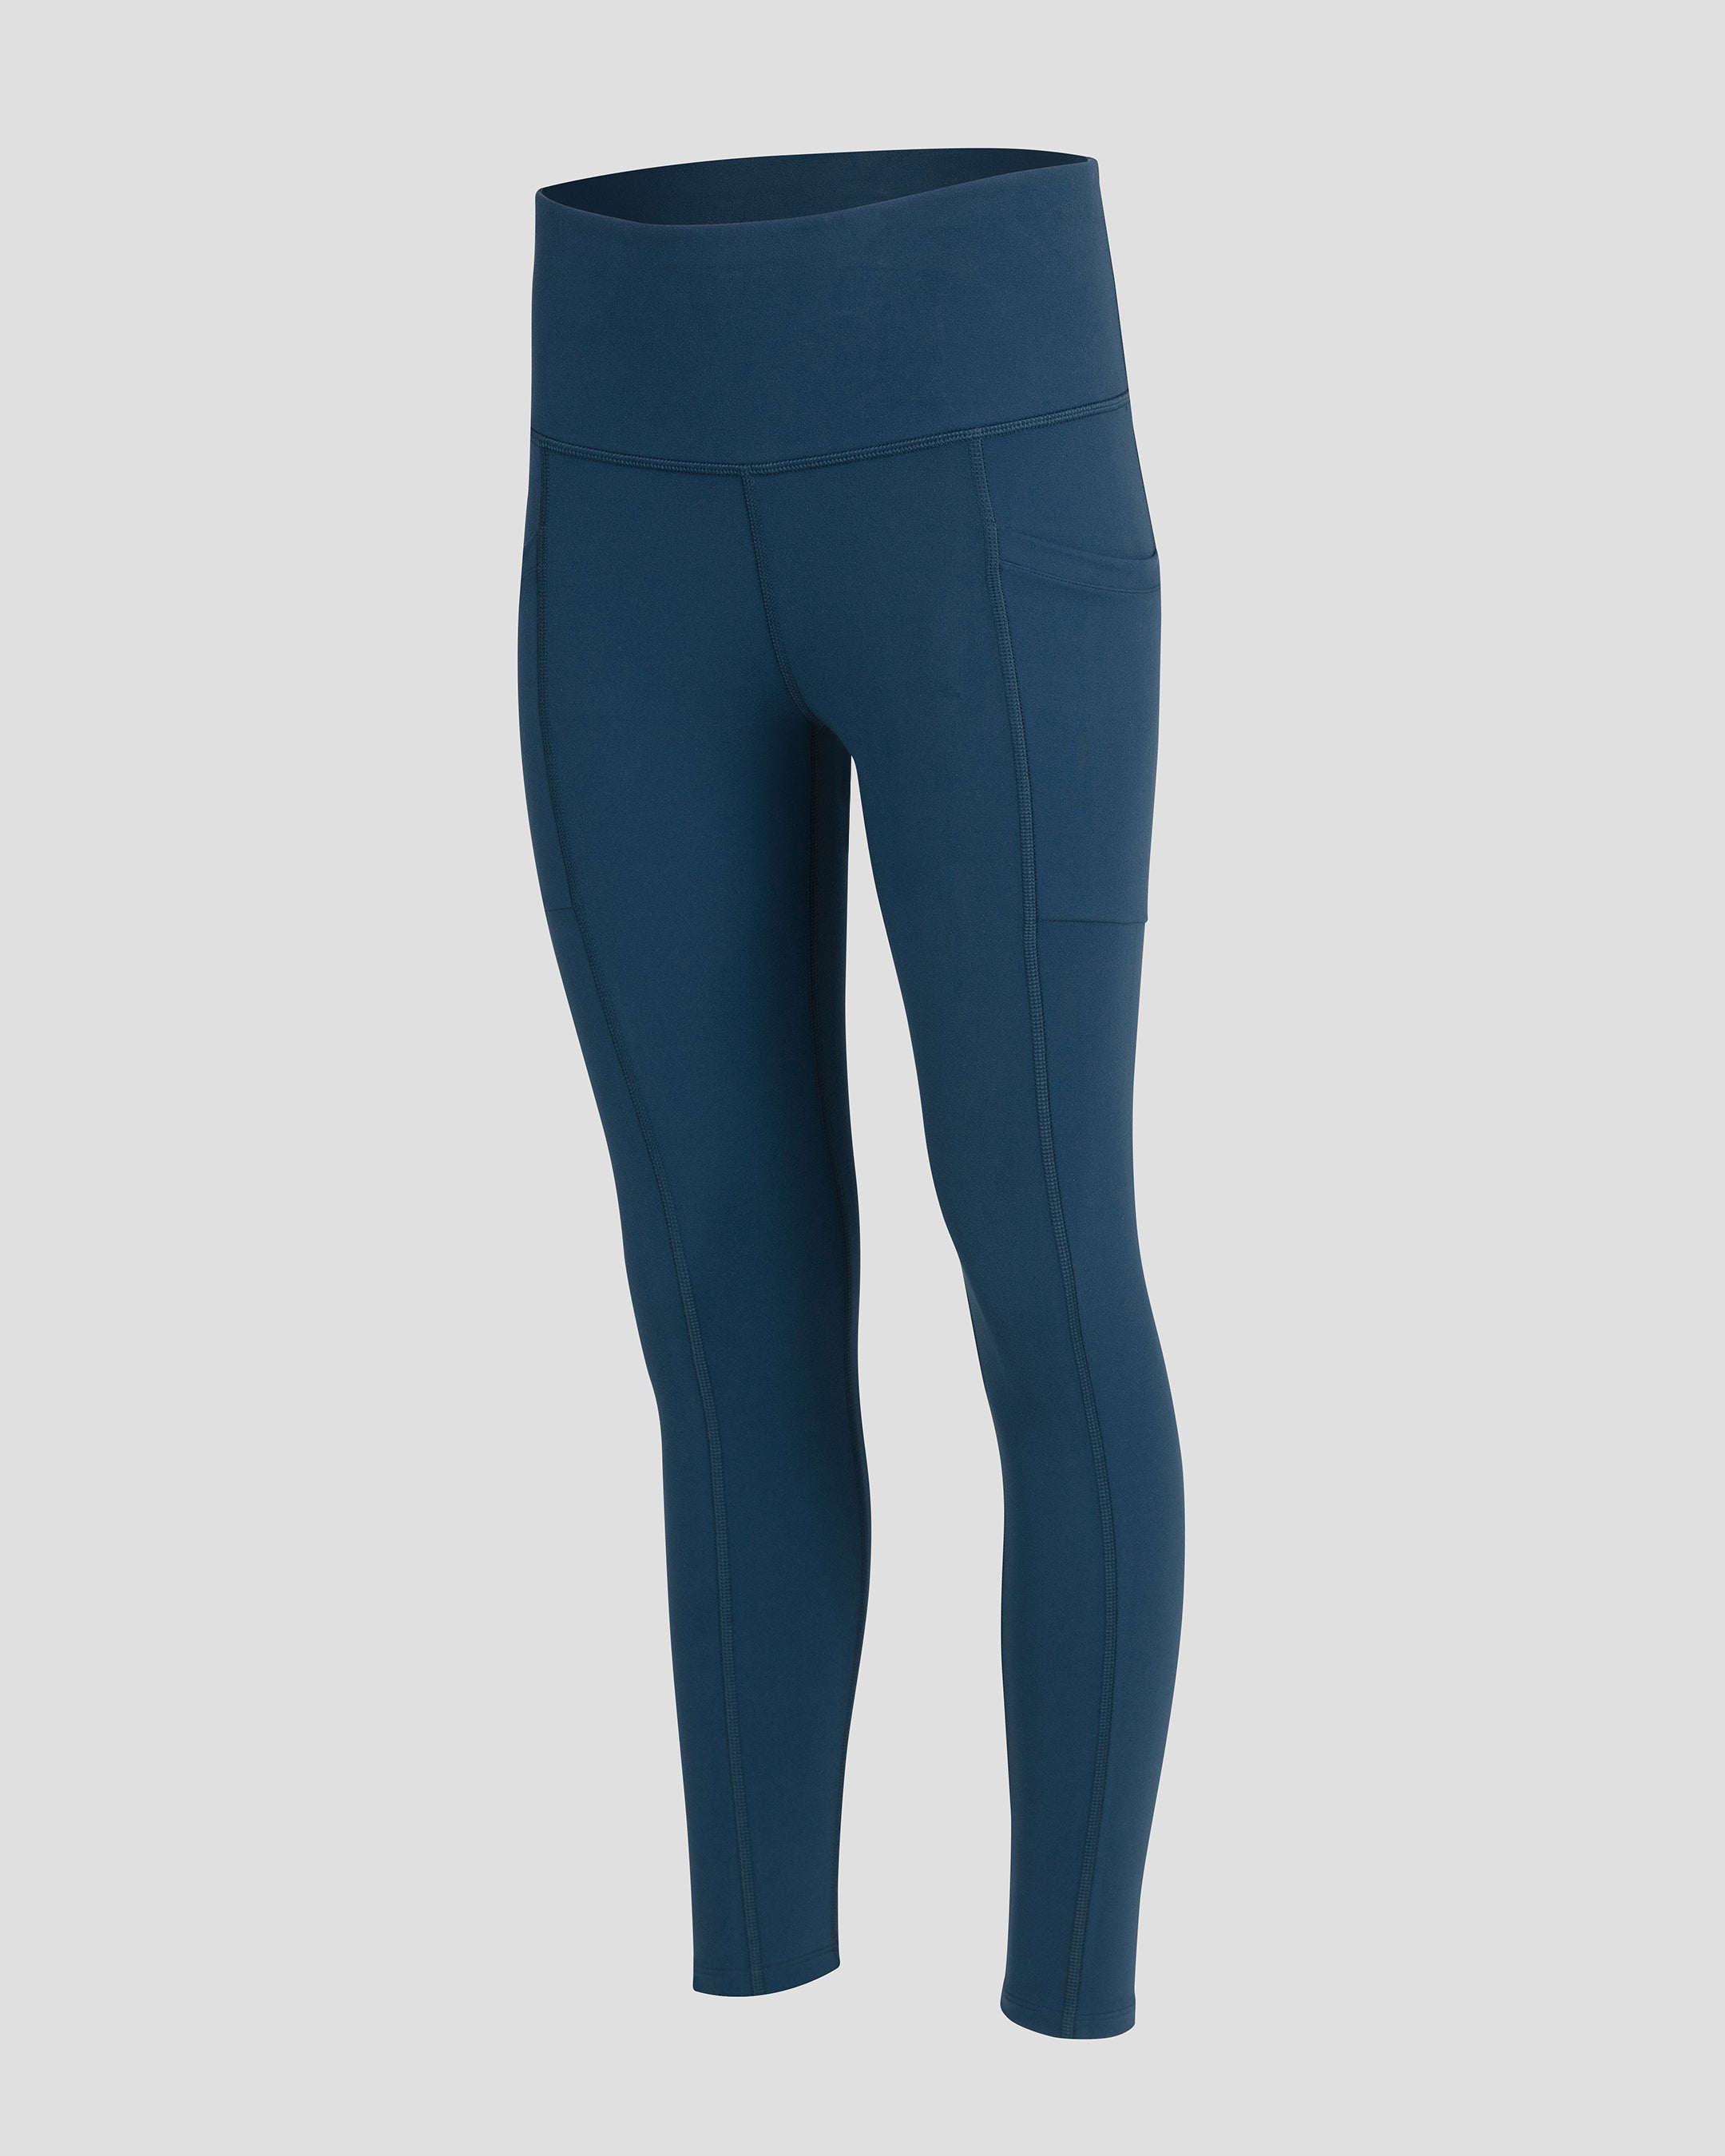 Layer 8 Women's Active 7/8 Leggings with Side Pockets 